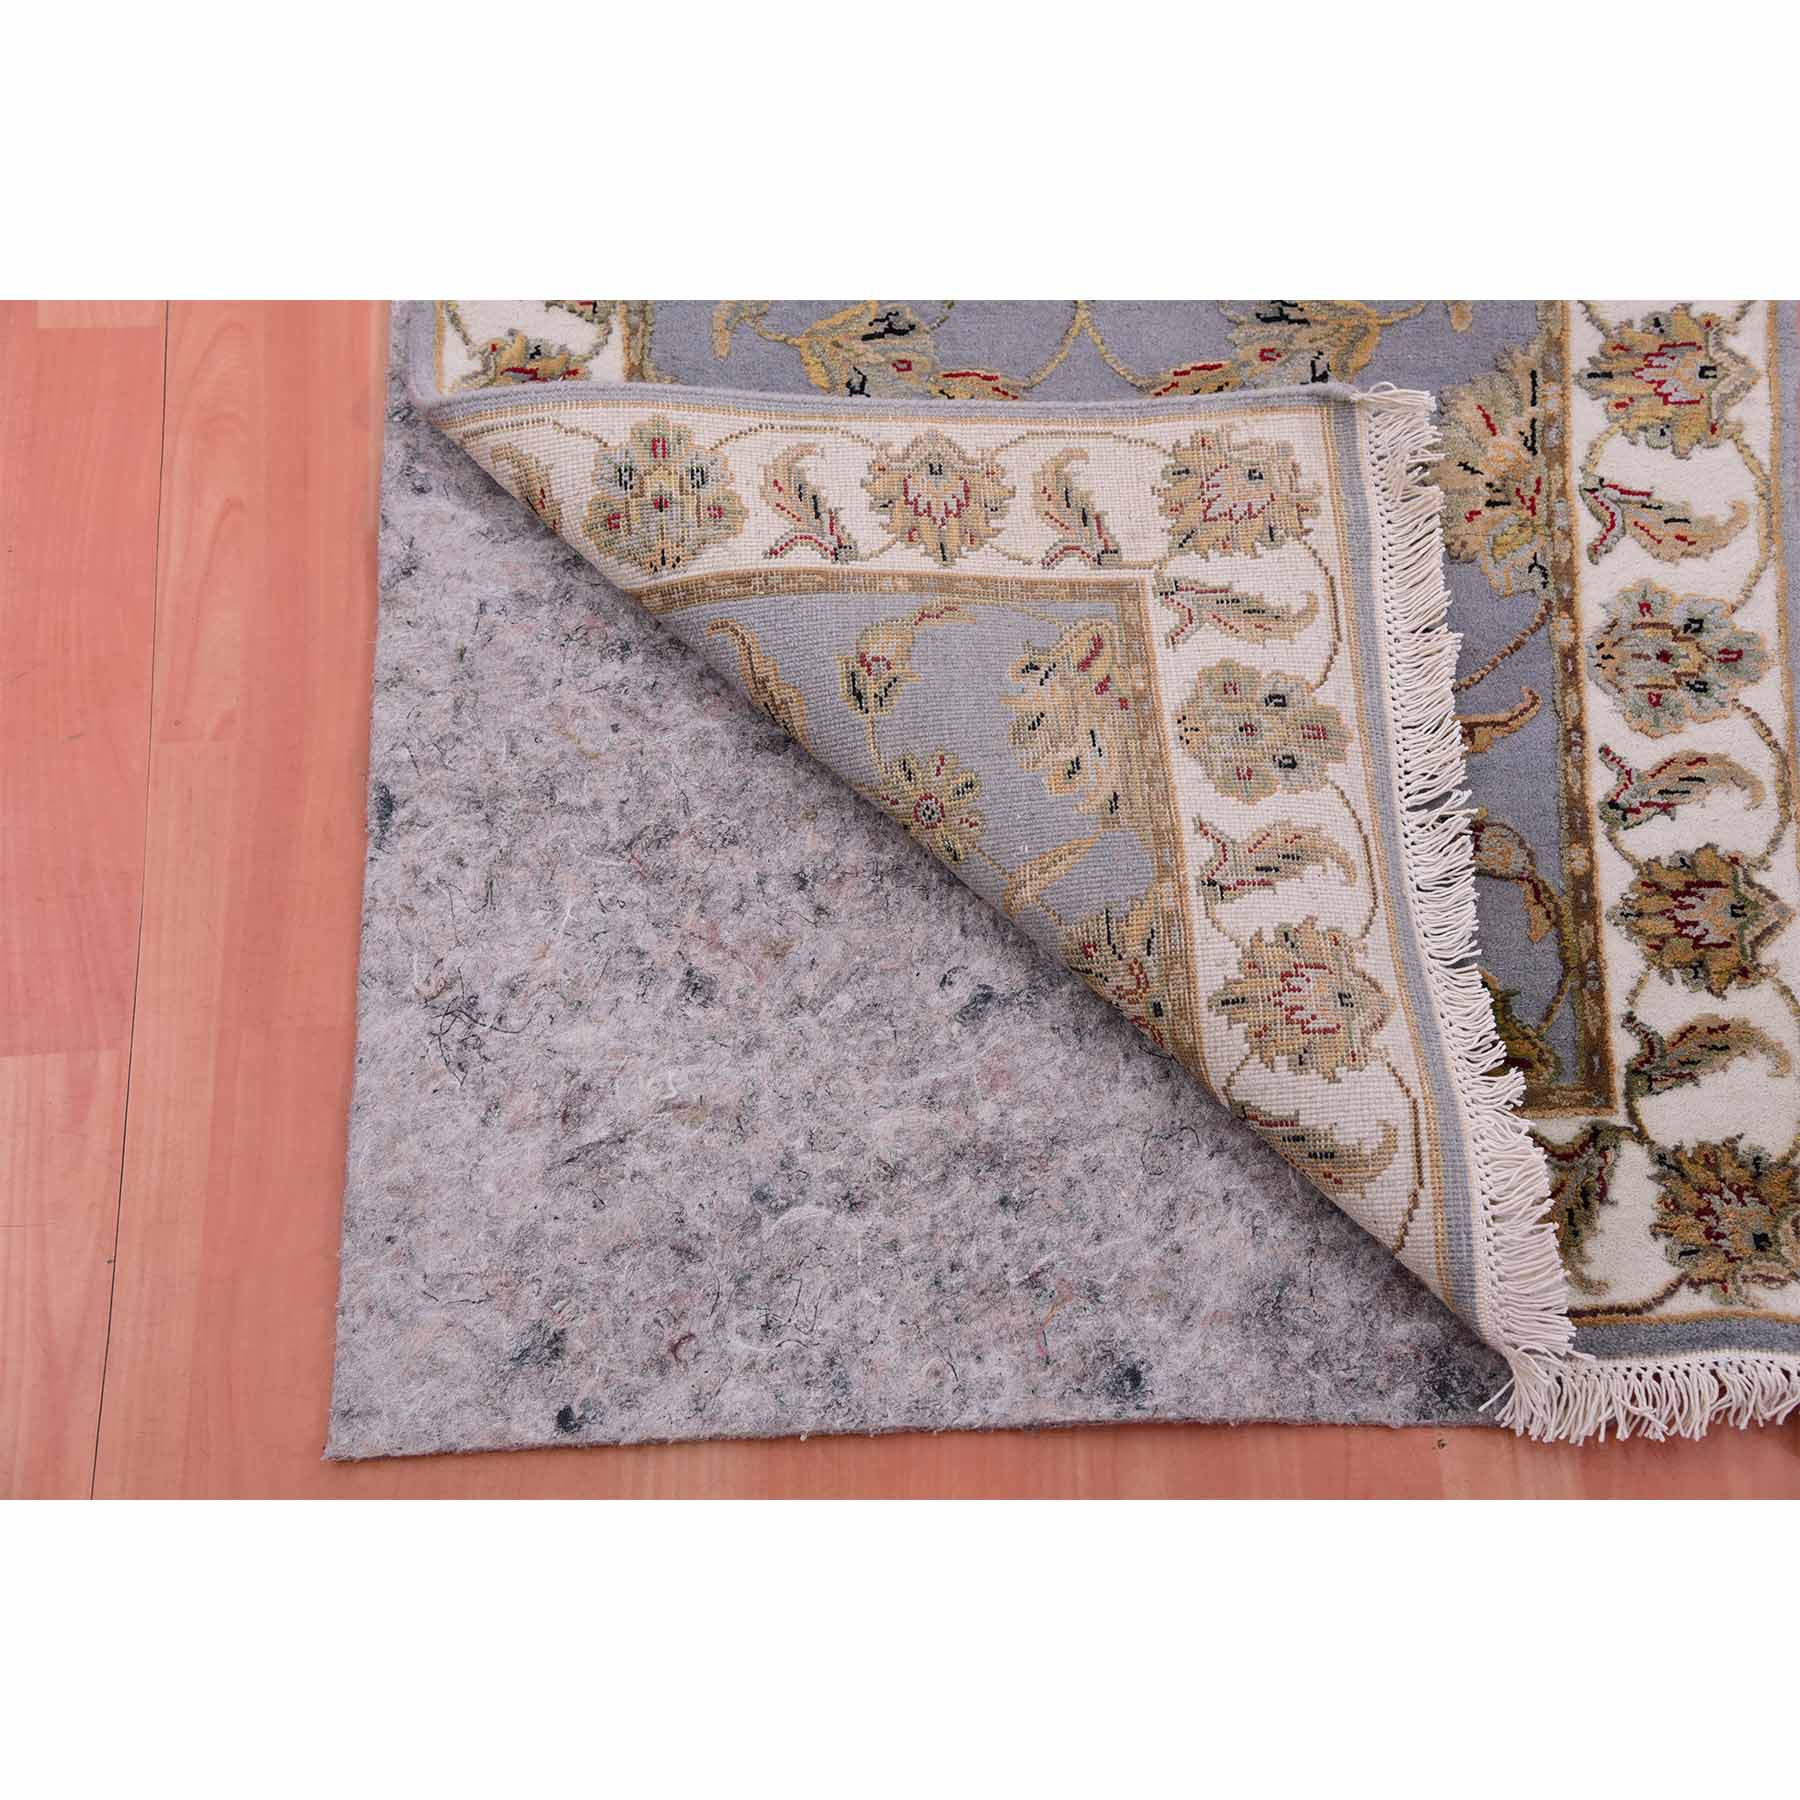 Rajasthan-Hand-Knotted-Rug-376825